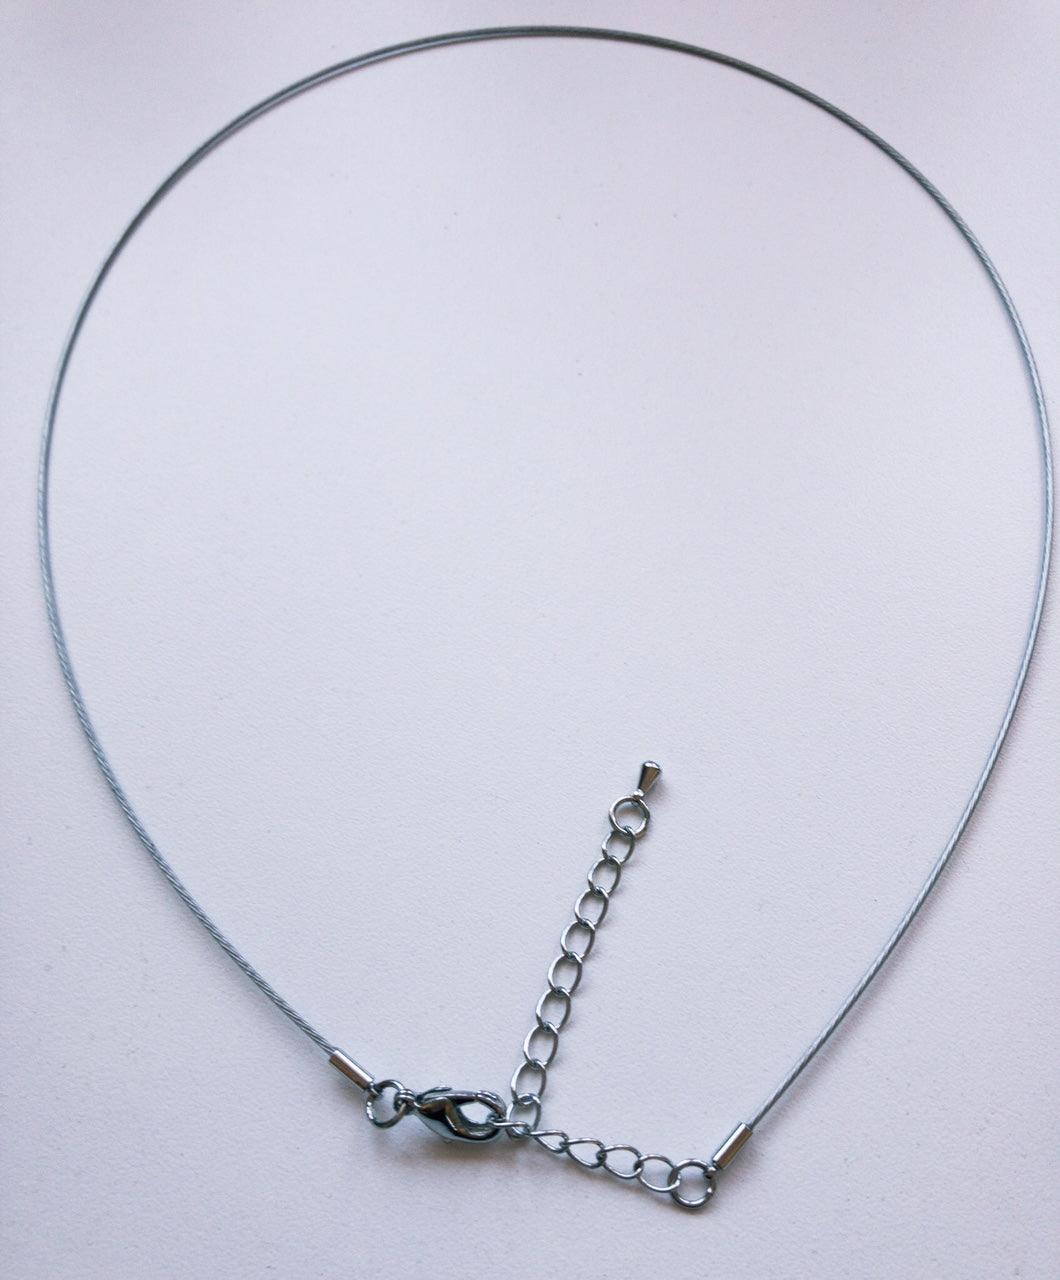 silver non-tarnish chain for pendants, adjustable length 18 - 20 inches